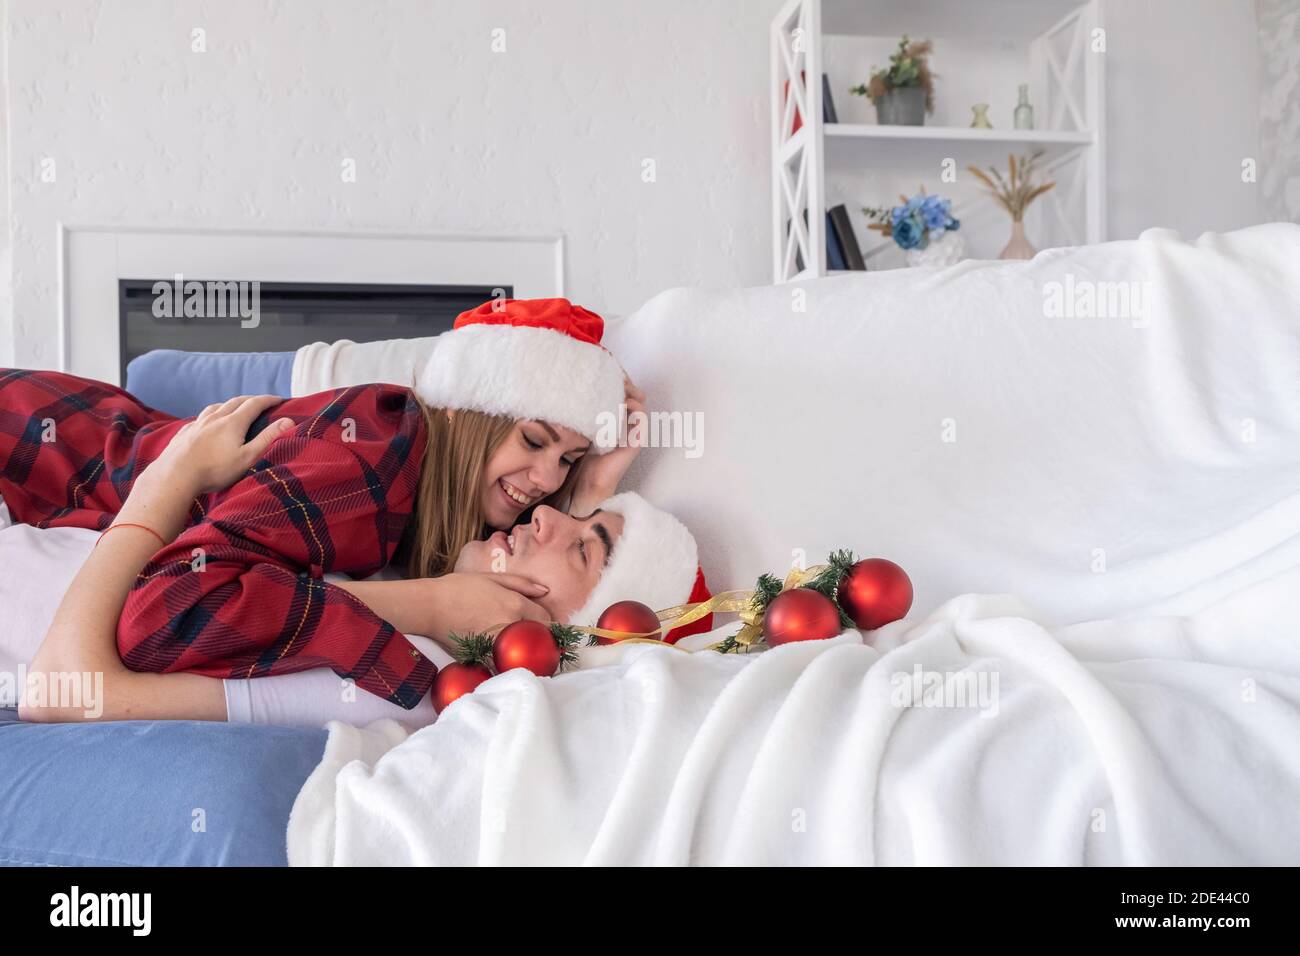 Side view of happy couple lying on couch or sofa wearing santa hats and pajamas. Young man and woman cuddling and looking at each other with tendernes Stock Photo